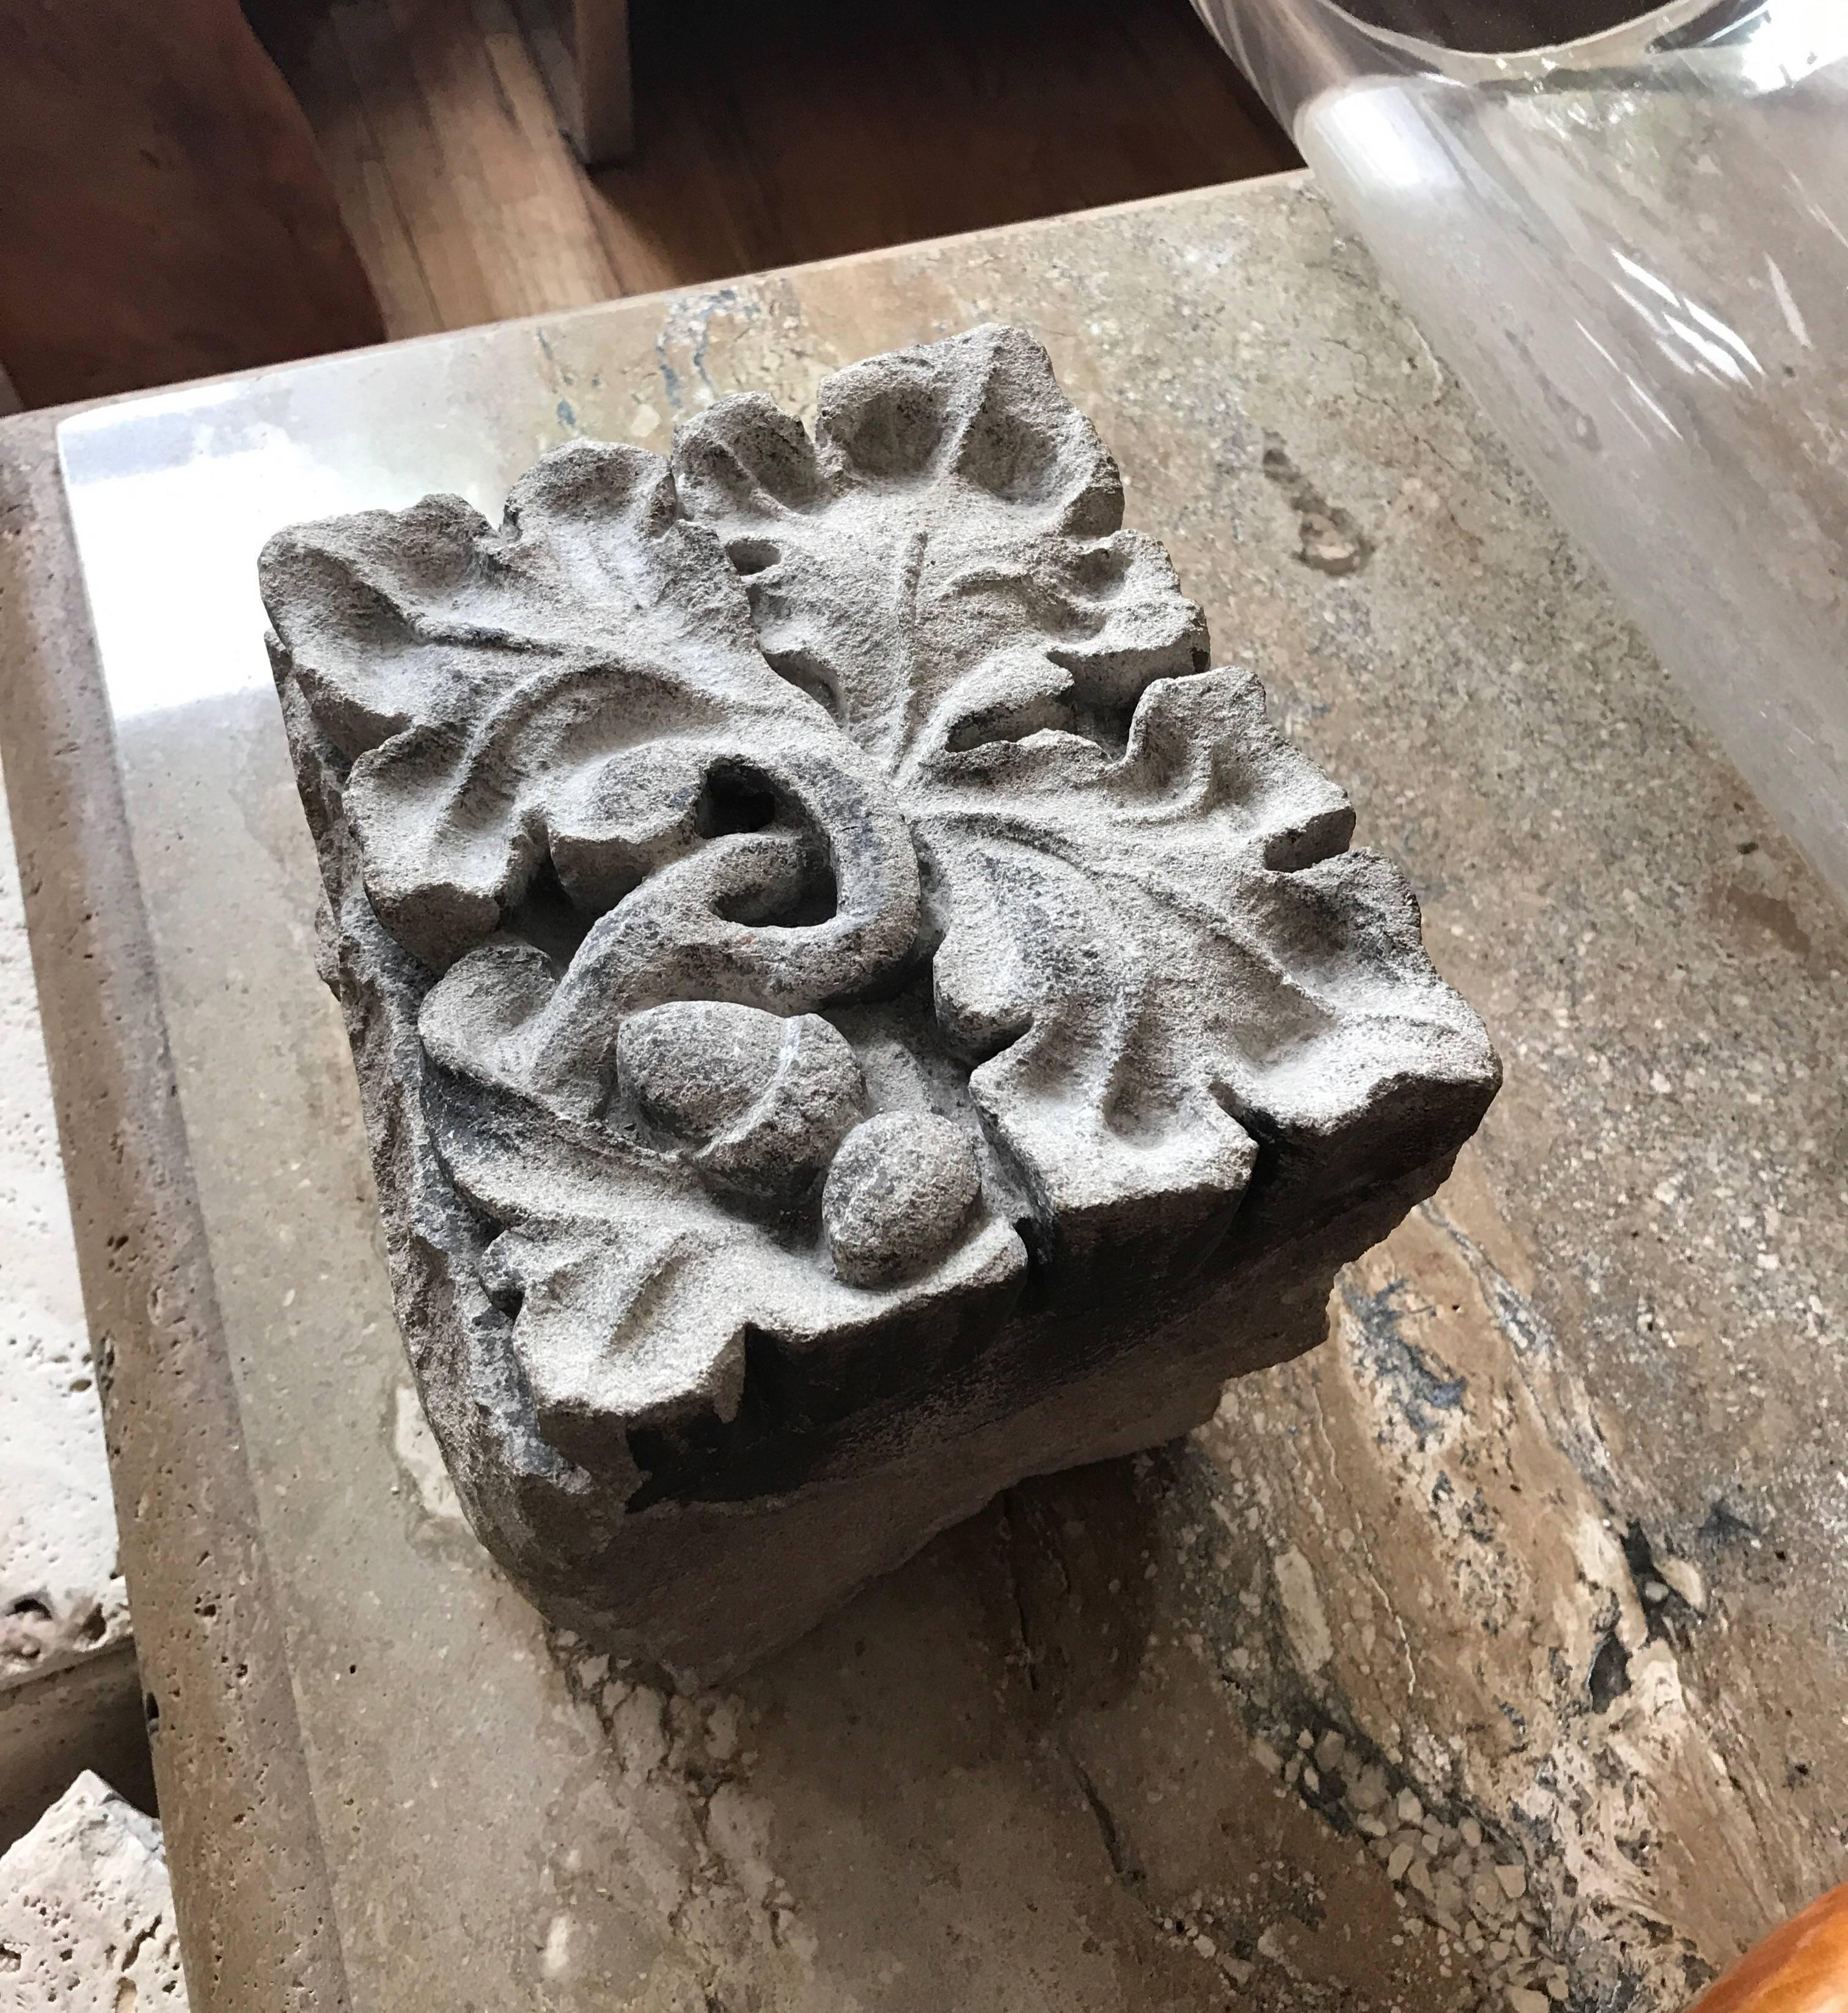 A highly versatile small carved limestone architectural fragment featuring with oak leaves and acorns in high relief. 
Because of its small size this architectural fragment from a Chicago building could be used indoors or outdoors as a decorative